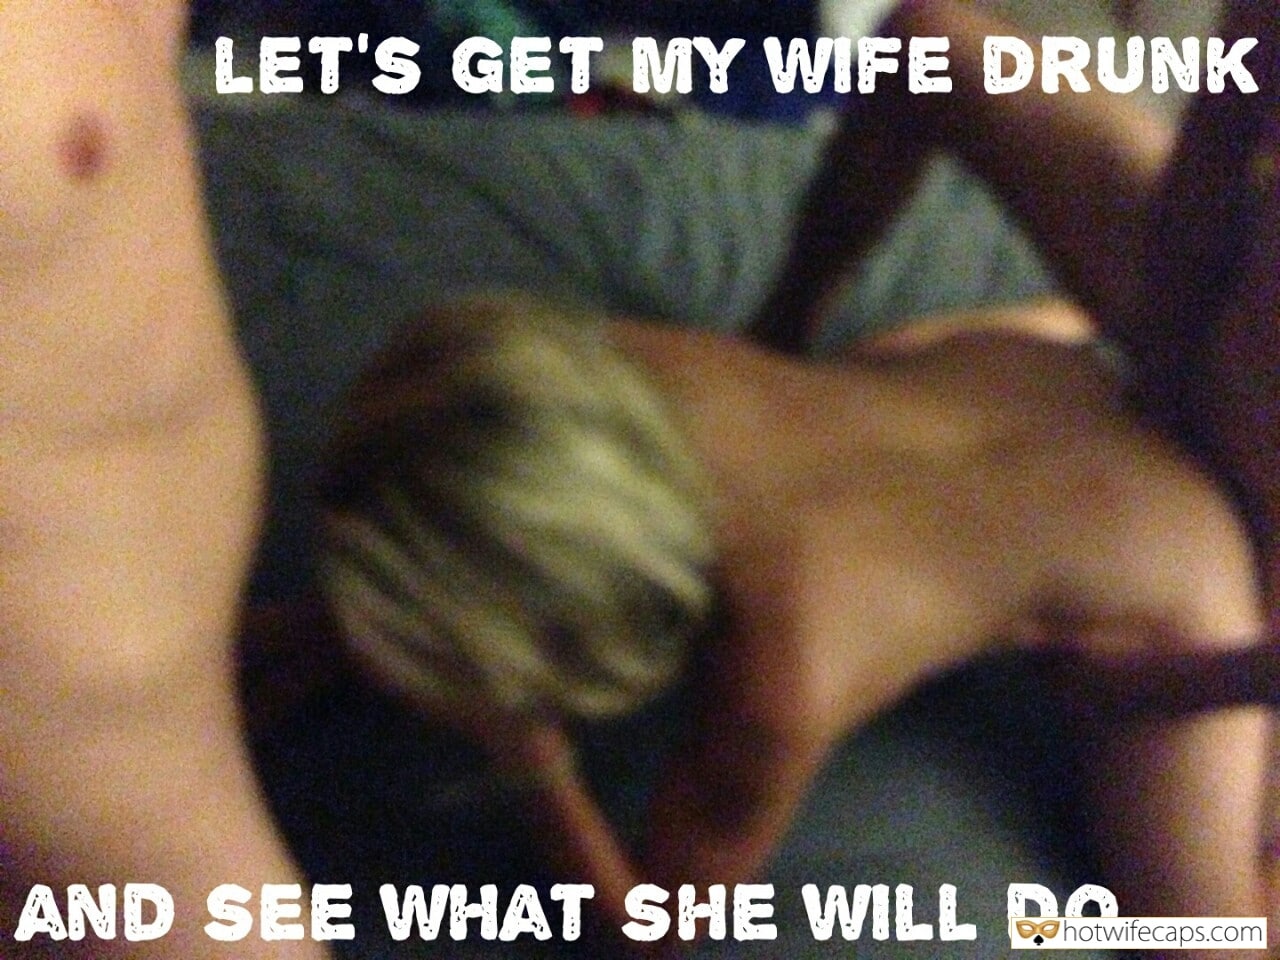 Wife Sharing Threesome Group Sex hotwife caption: LET’S GET MY WIFE DRUNK AND SEE WHAT SHE WILL DO… fucking wife memes The More She Drunk Is the More Guys Can Fuck Her